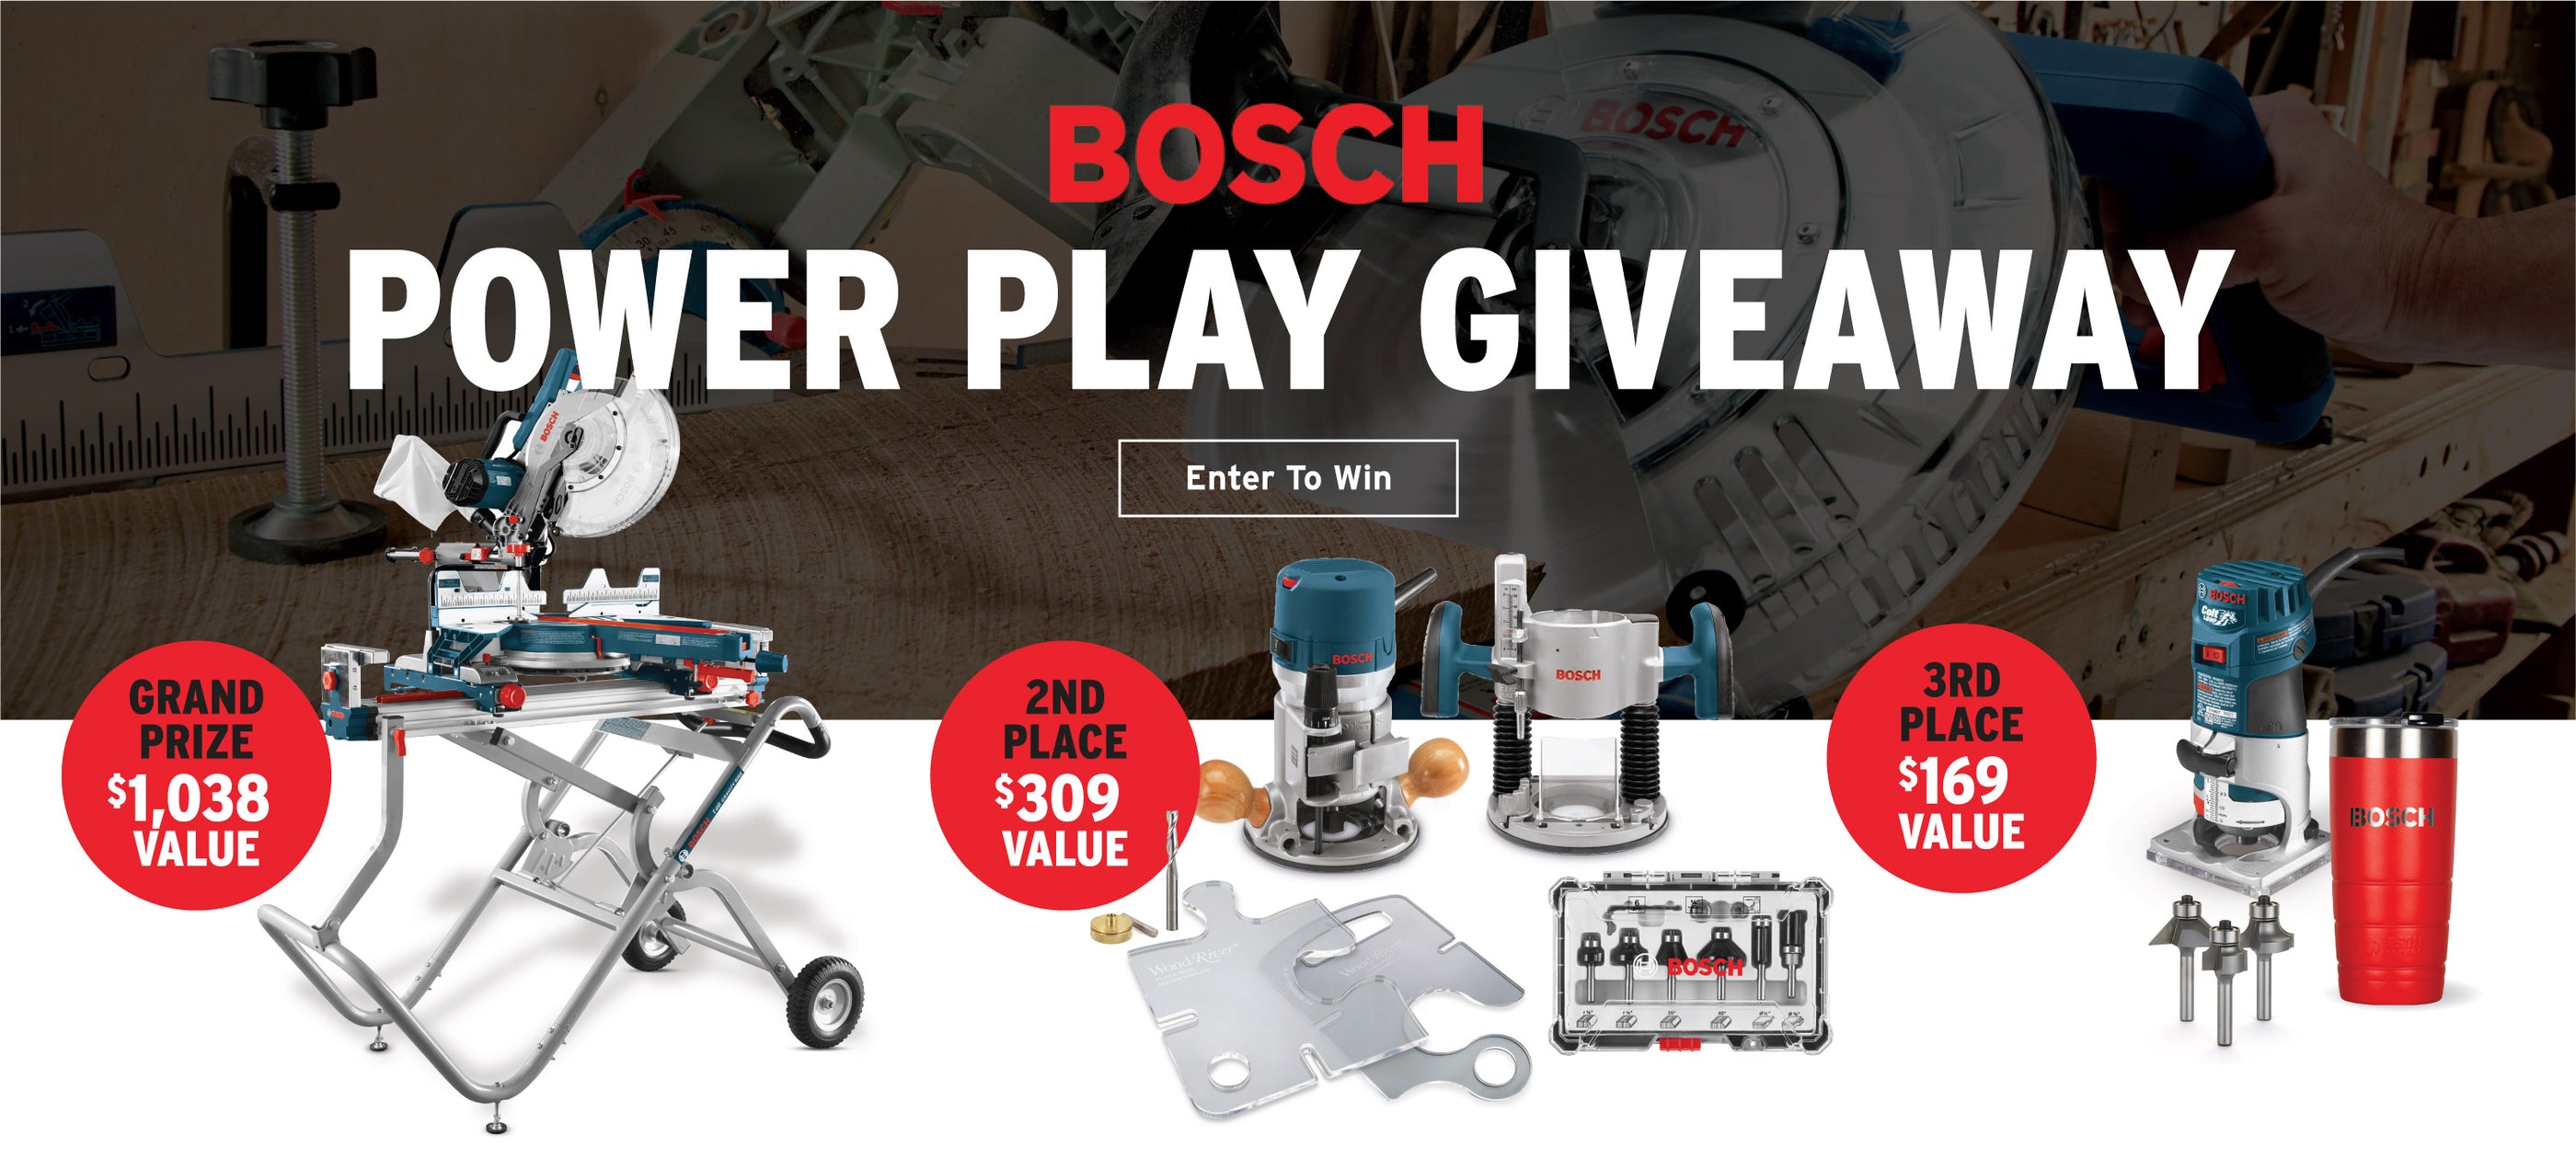 Bosch power play giveway. Enter to win.